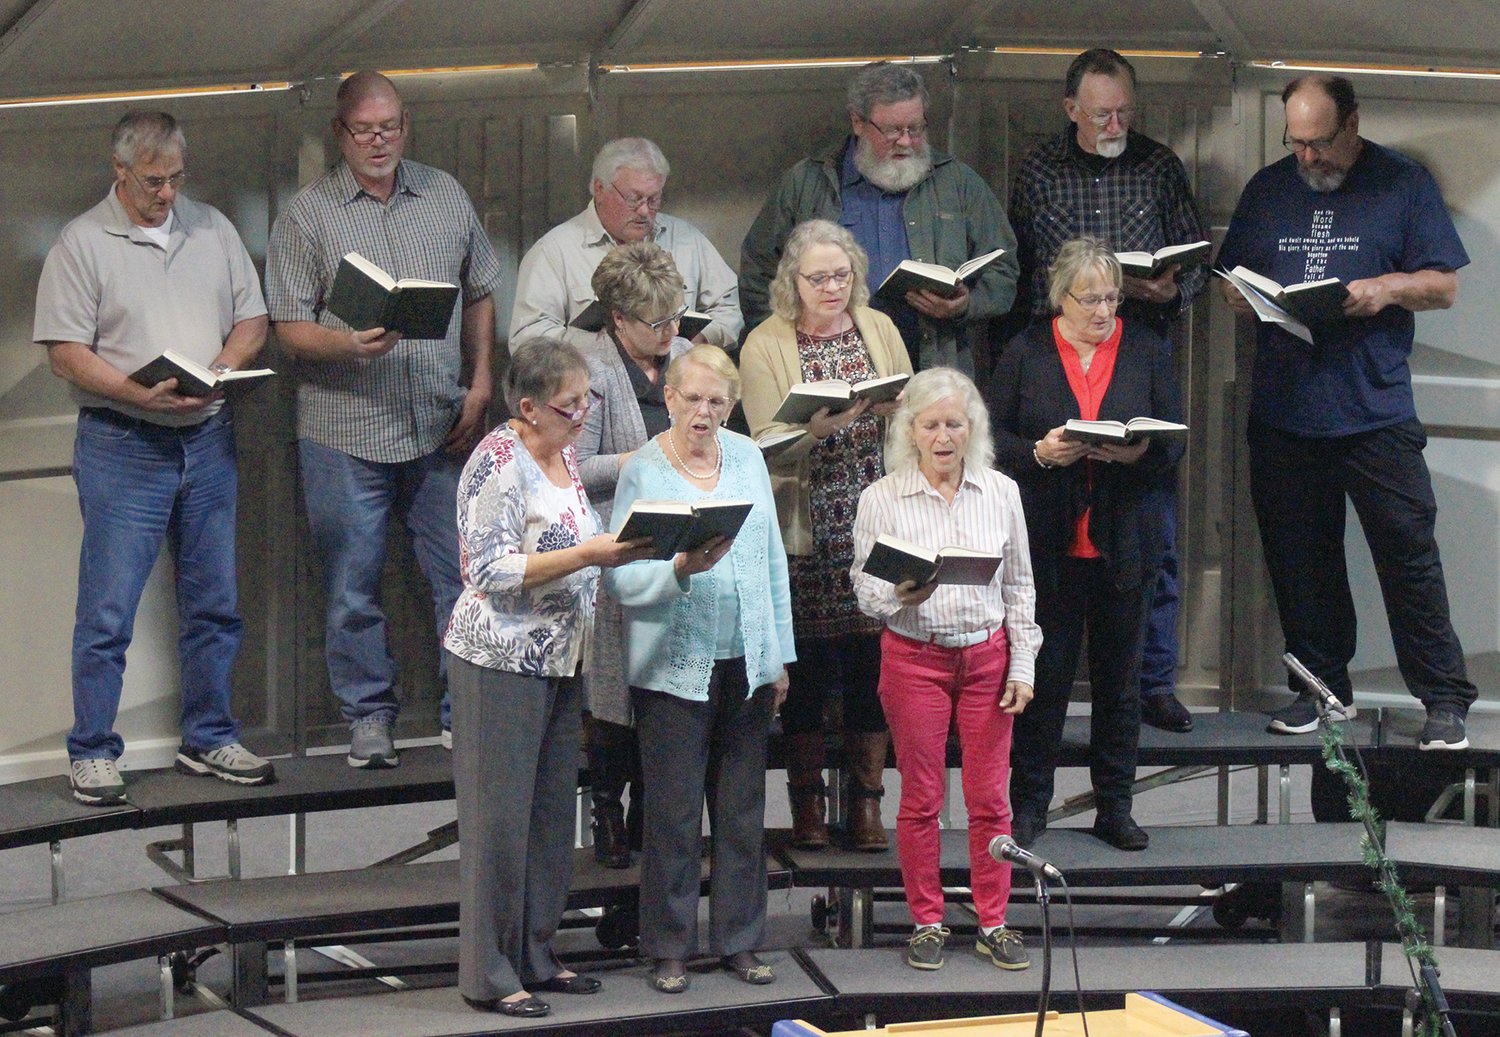 The Elk Creek Baptist Church Choir performs “One Small Child - Emmanuel” during the Vespers Service.